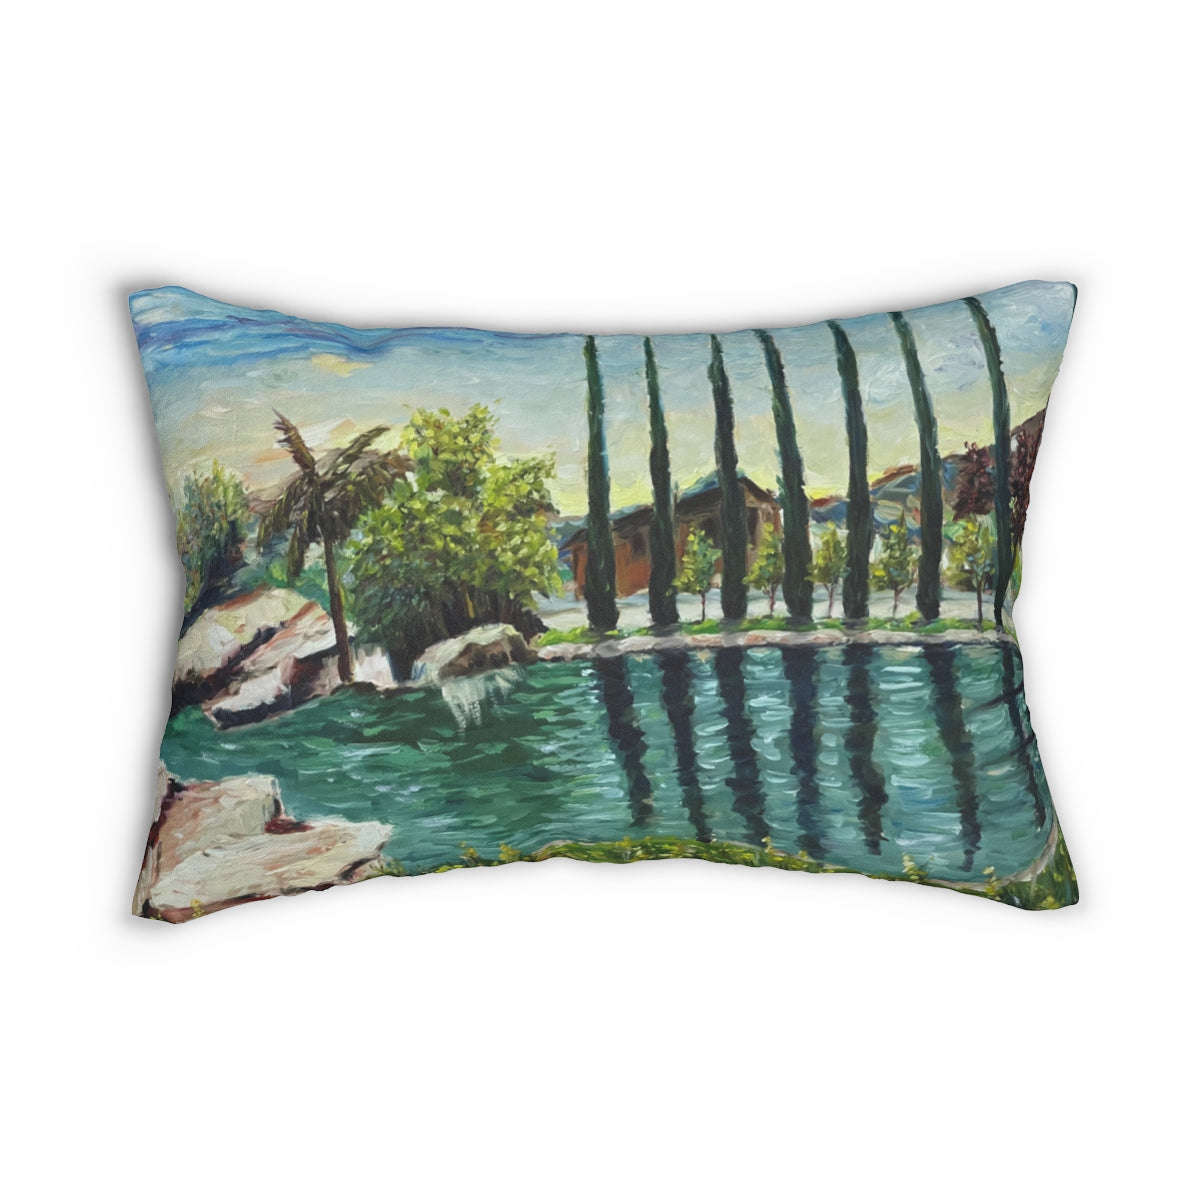 The Pond (GBV Winery) Lumbar Pillow